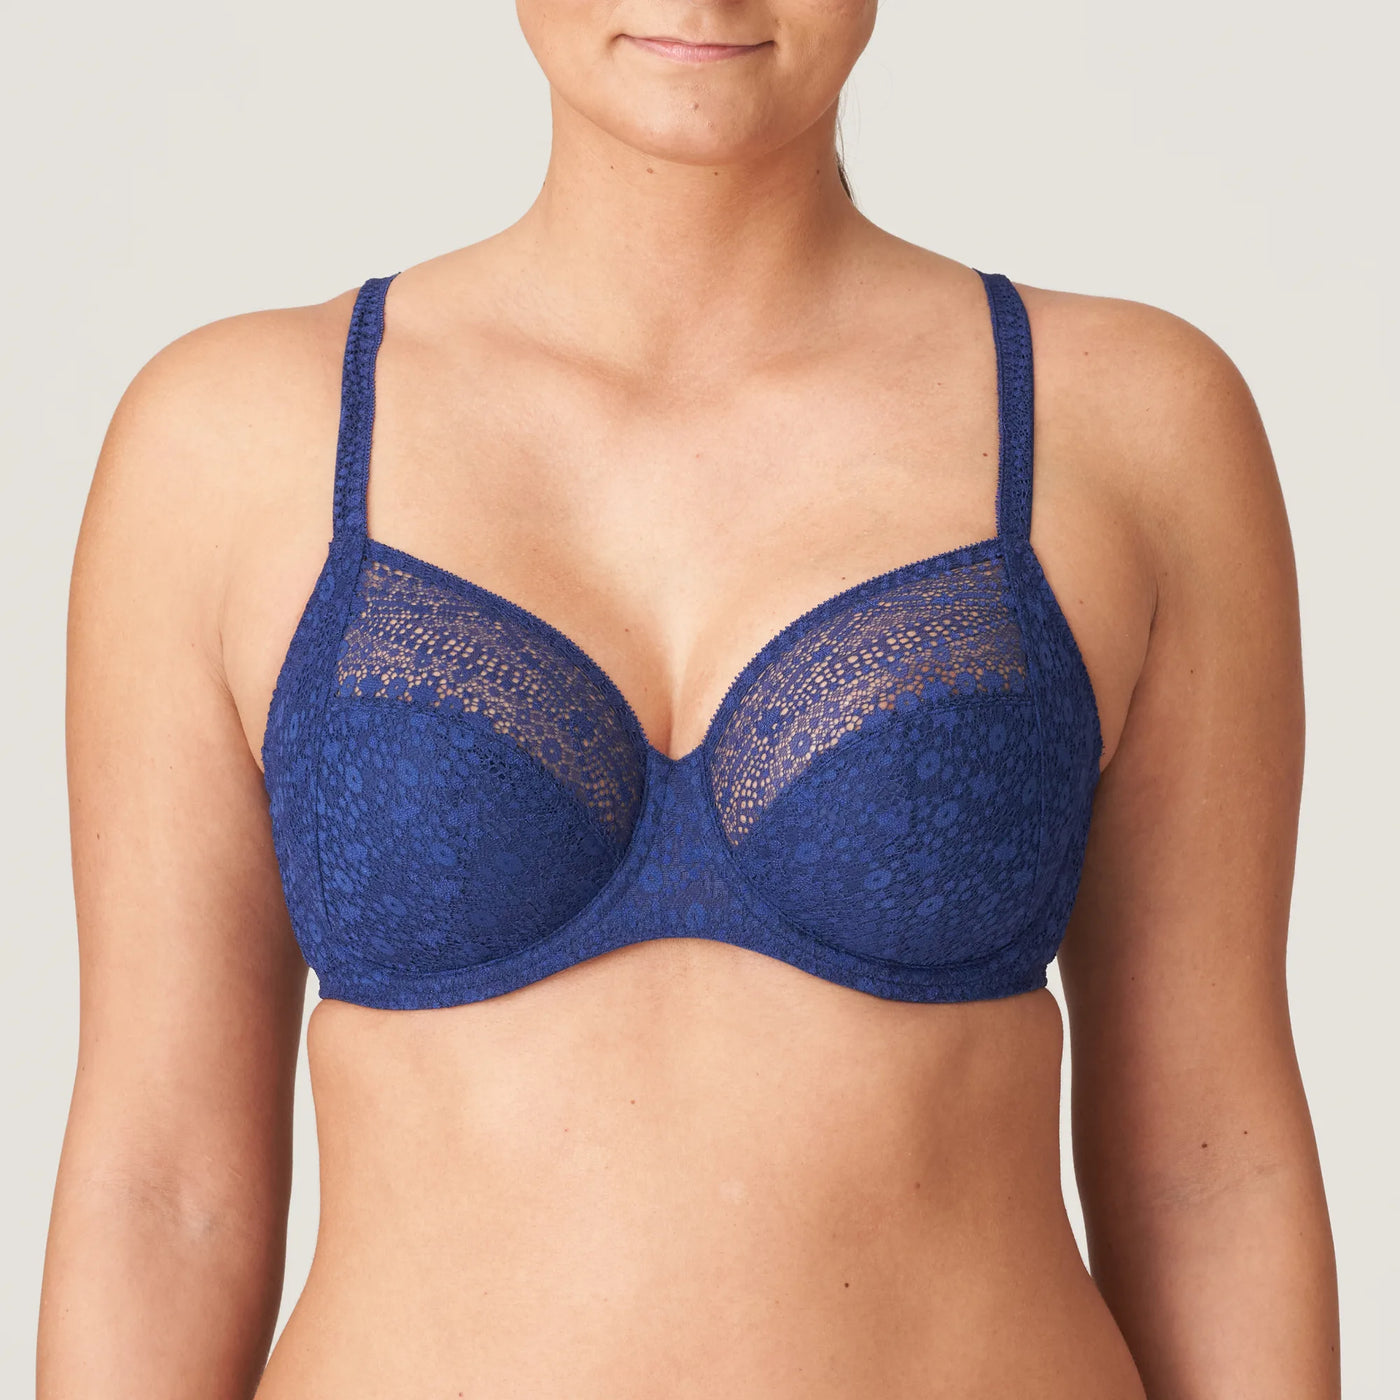 Women's Bras: 2 Items up to −78%